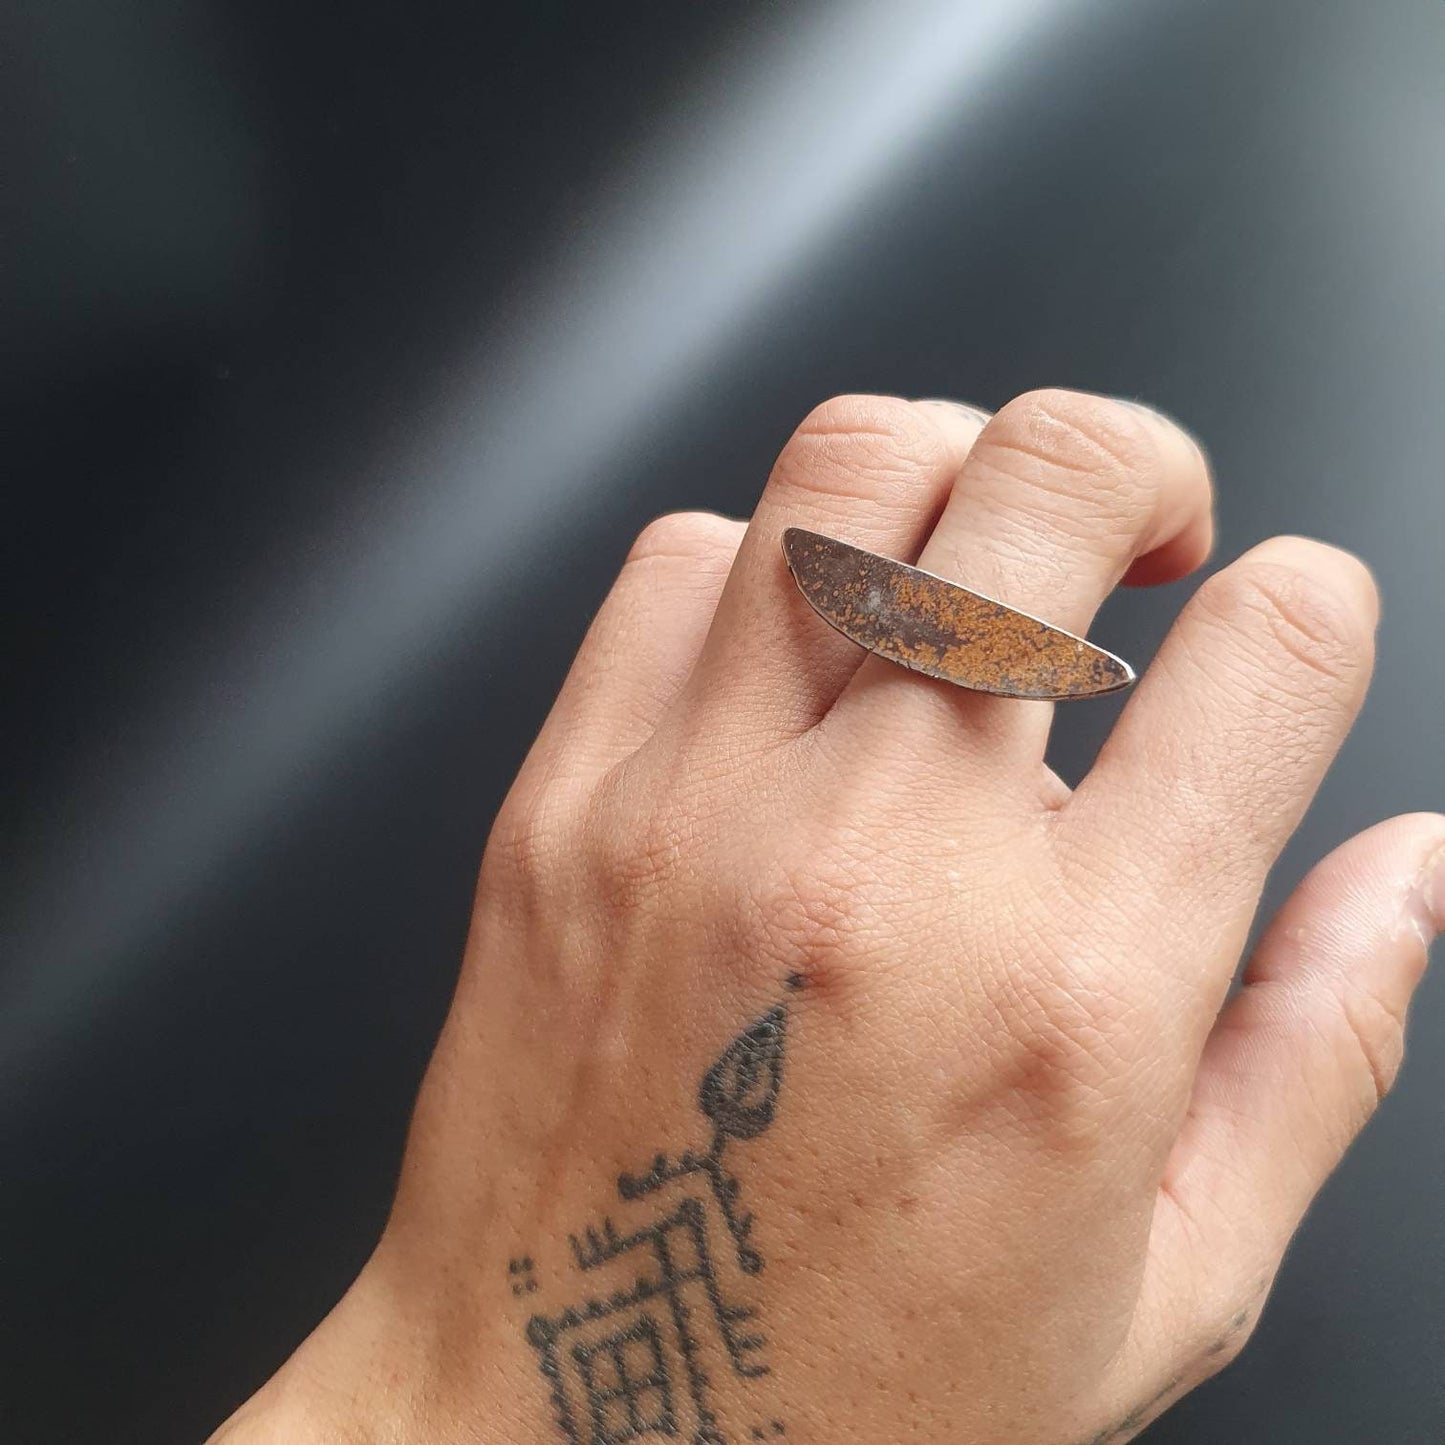 Sterling silver ring, statement ring, sterling silver jewelry, unusual gifts for all, unisex, unique jewelry, brutalist,art, artistic design